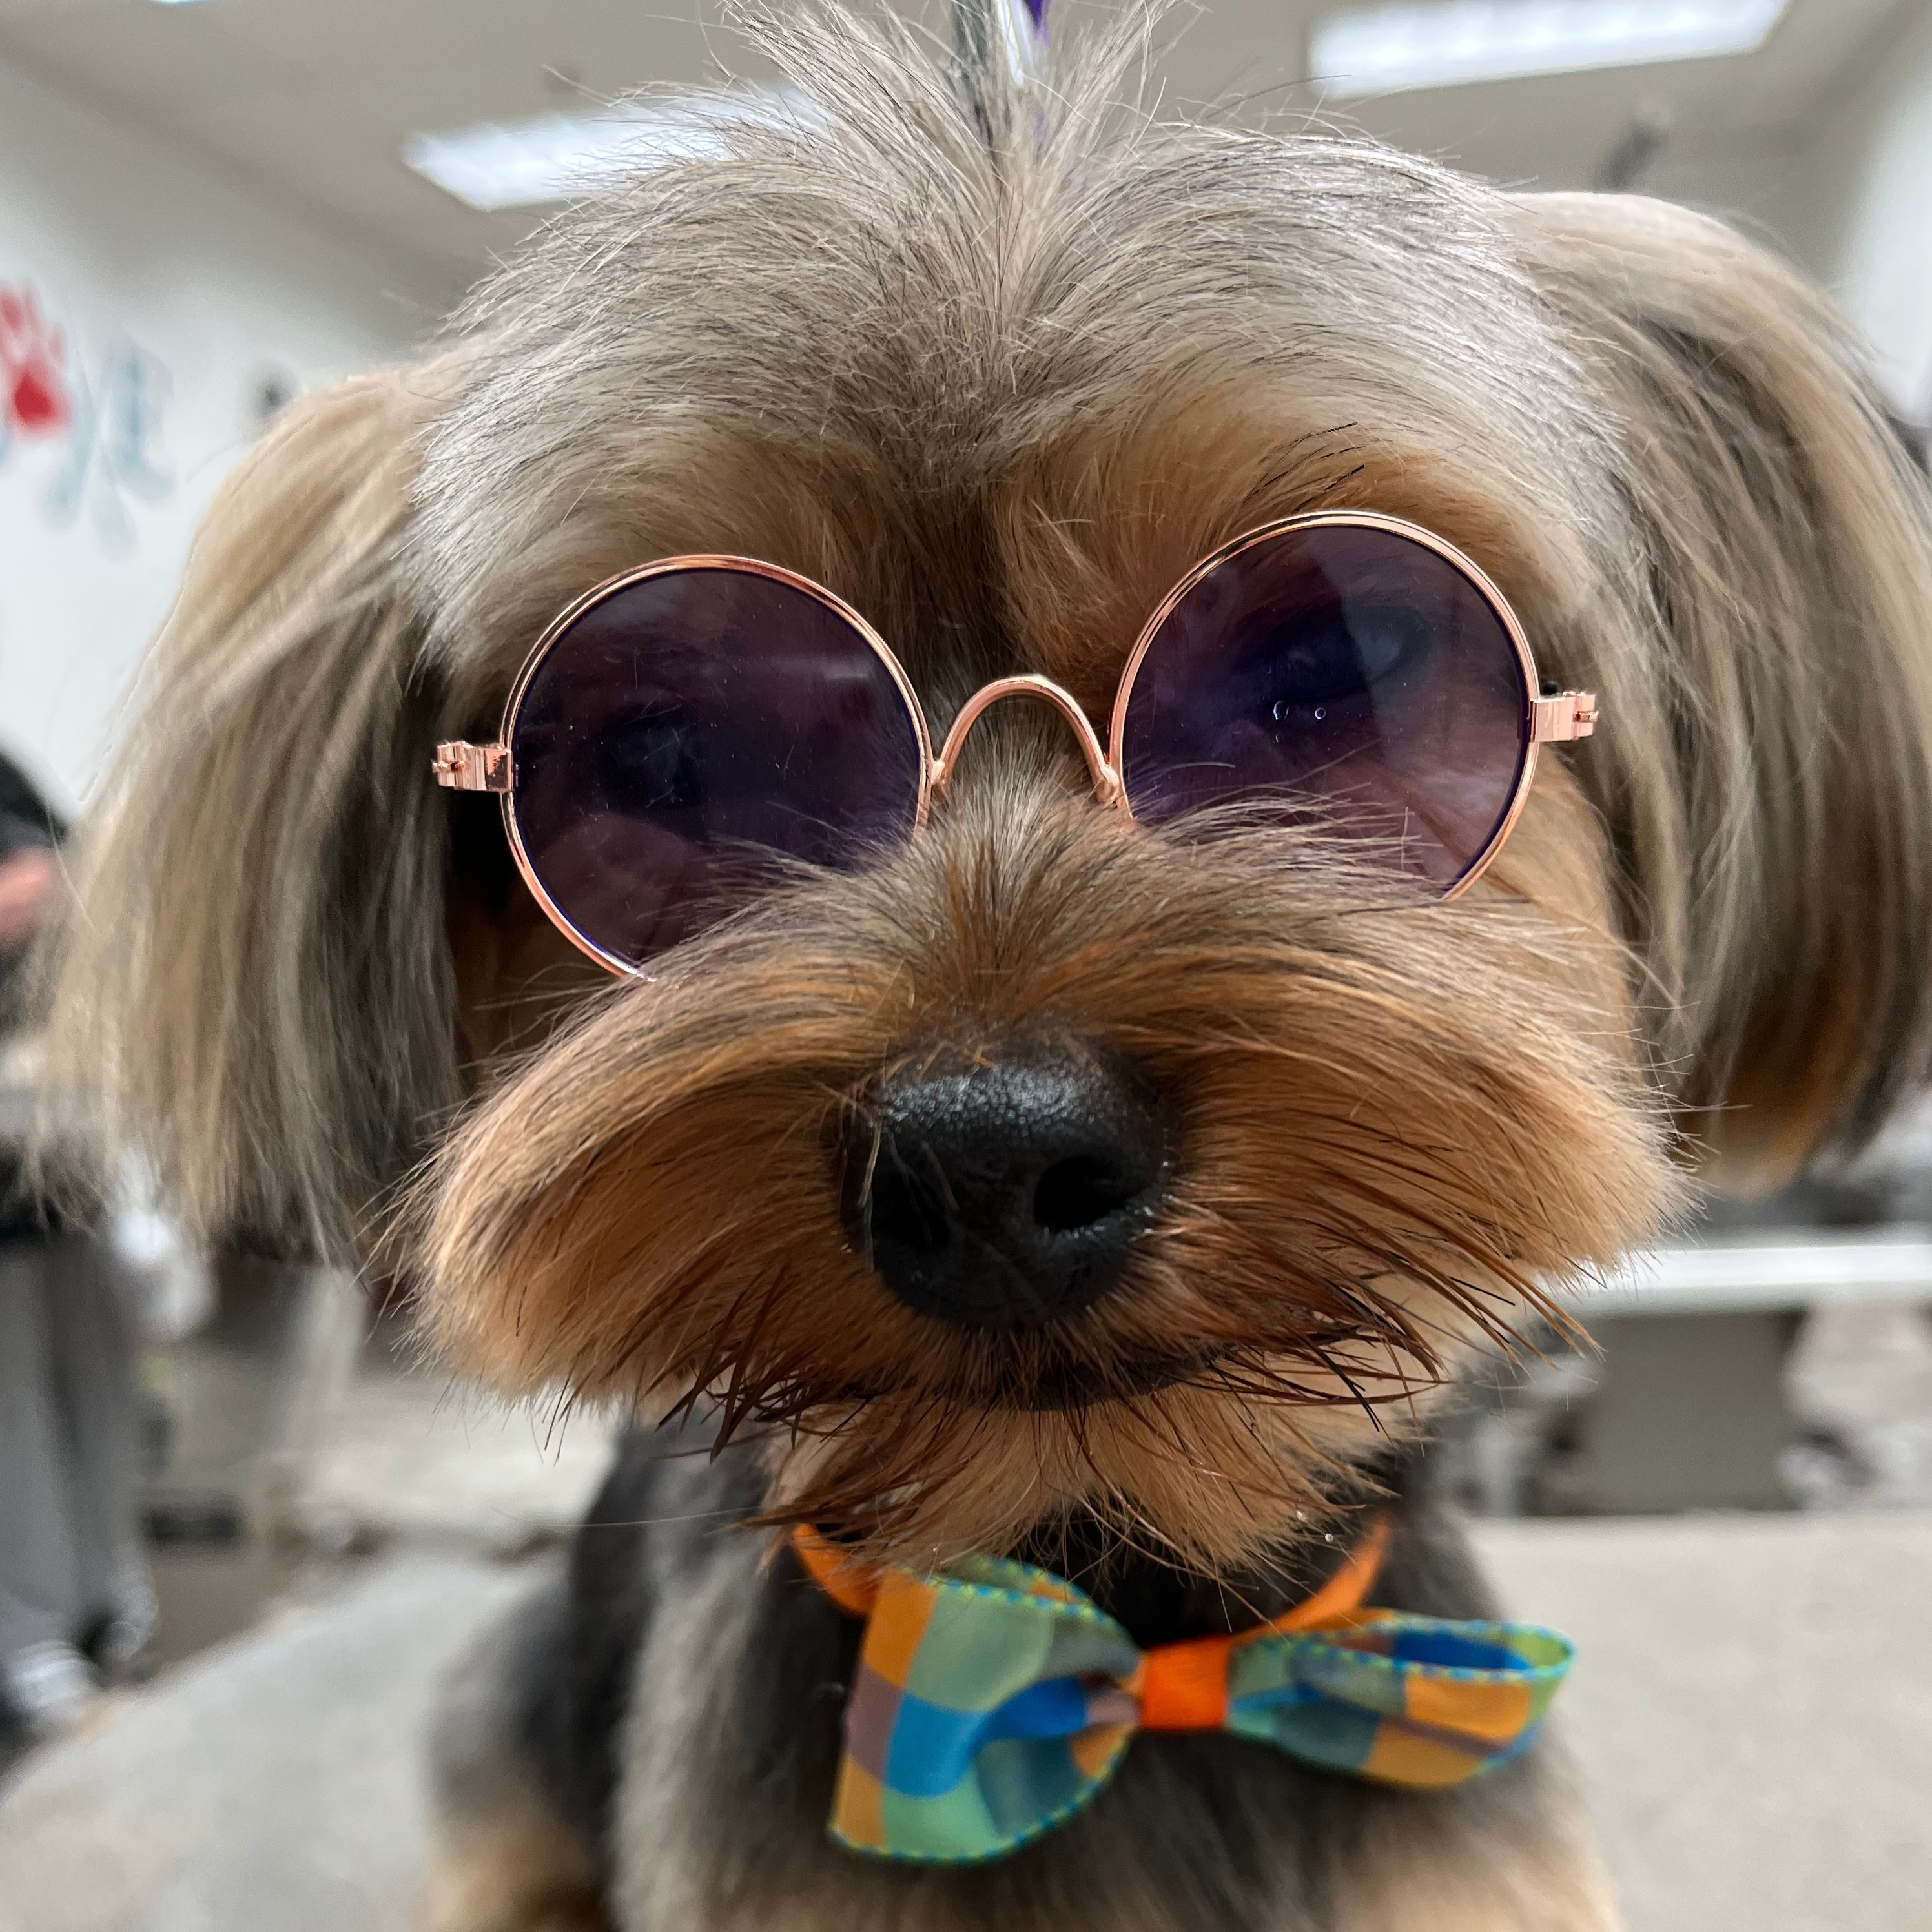 Yorkshire Terrier dressed with hippie style glasses and a colorful bowtie after being groomed with Andis tools.